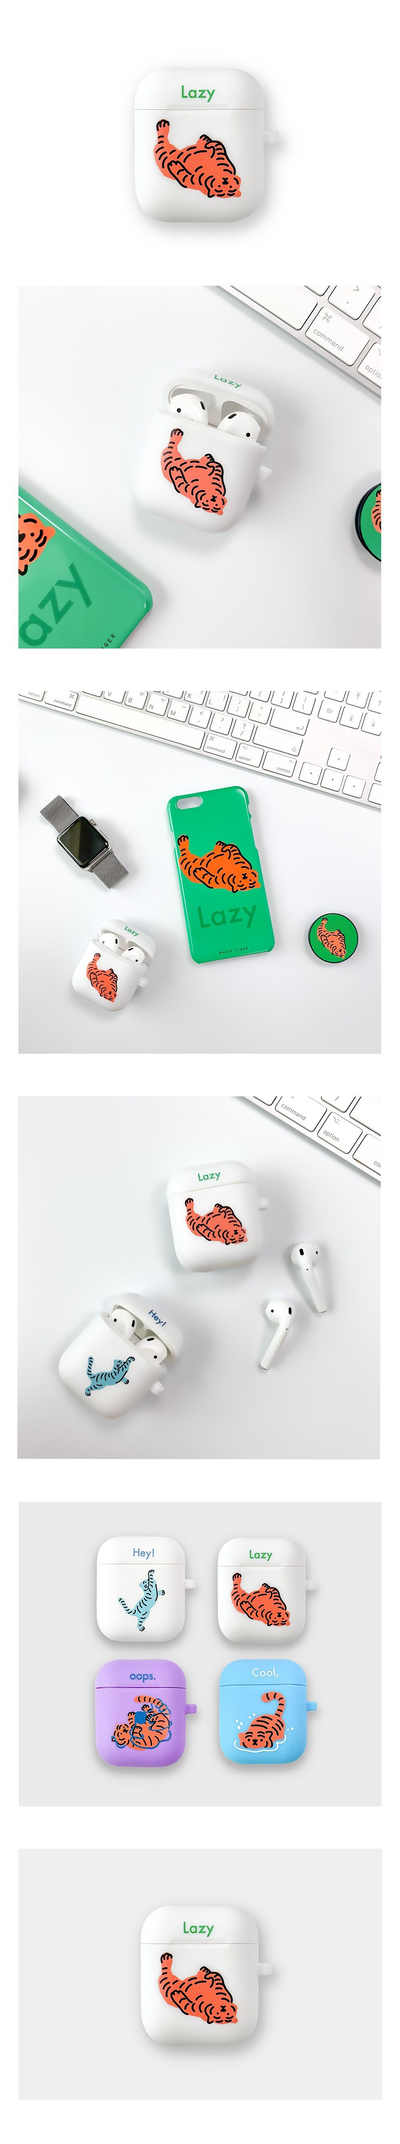 Lazy Tiger AirPods case